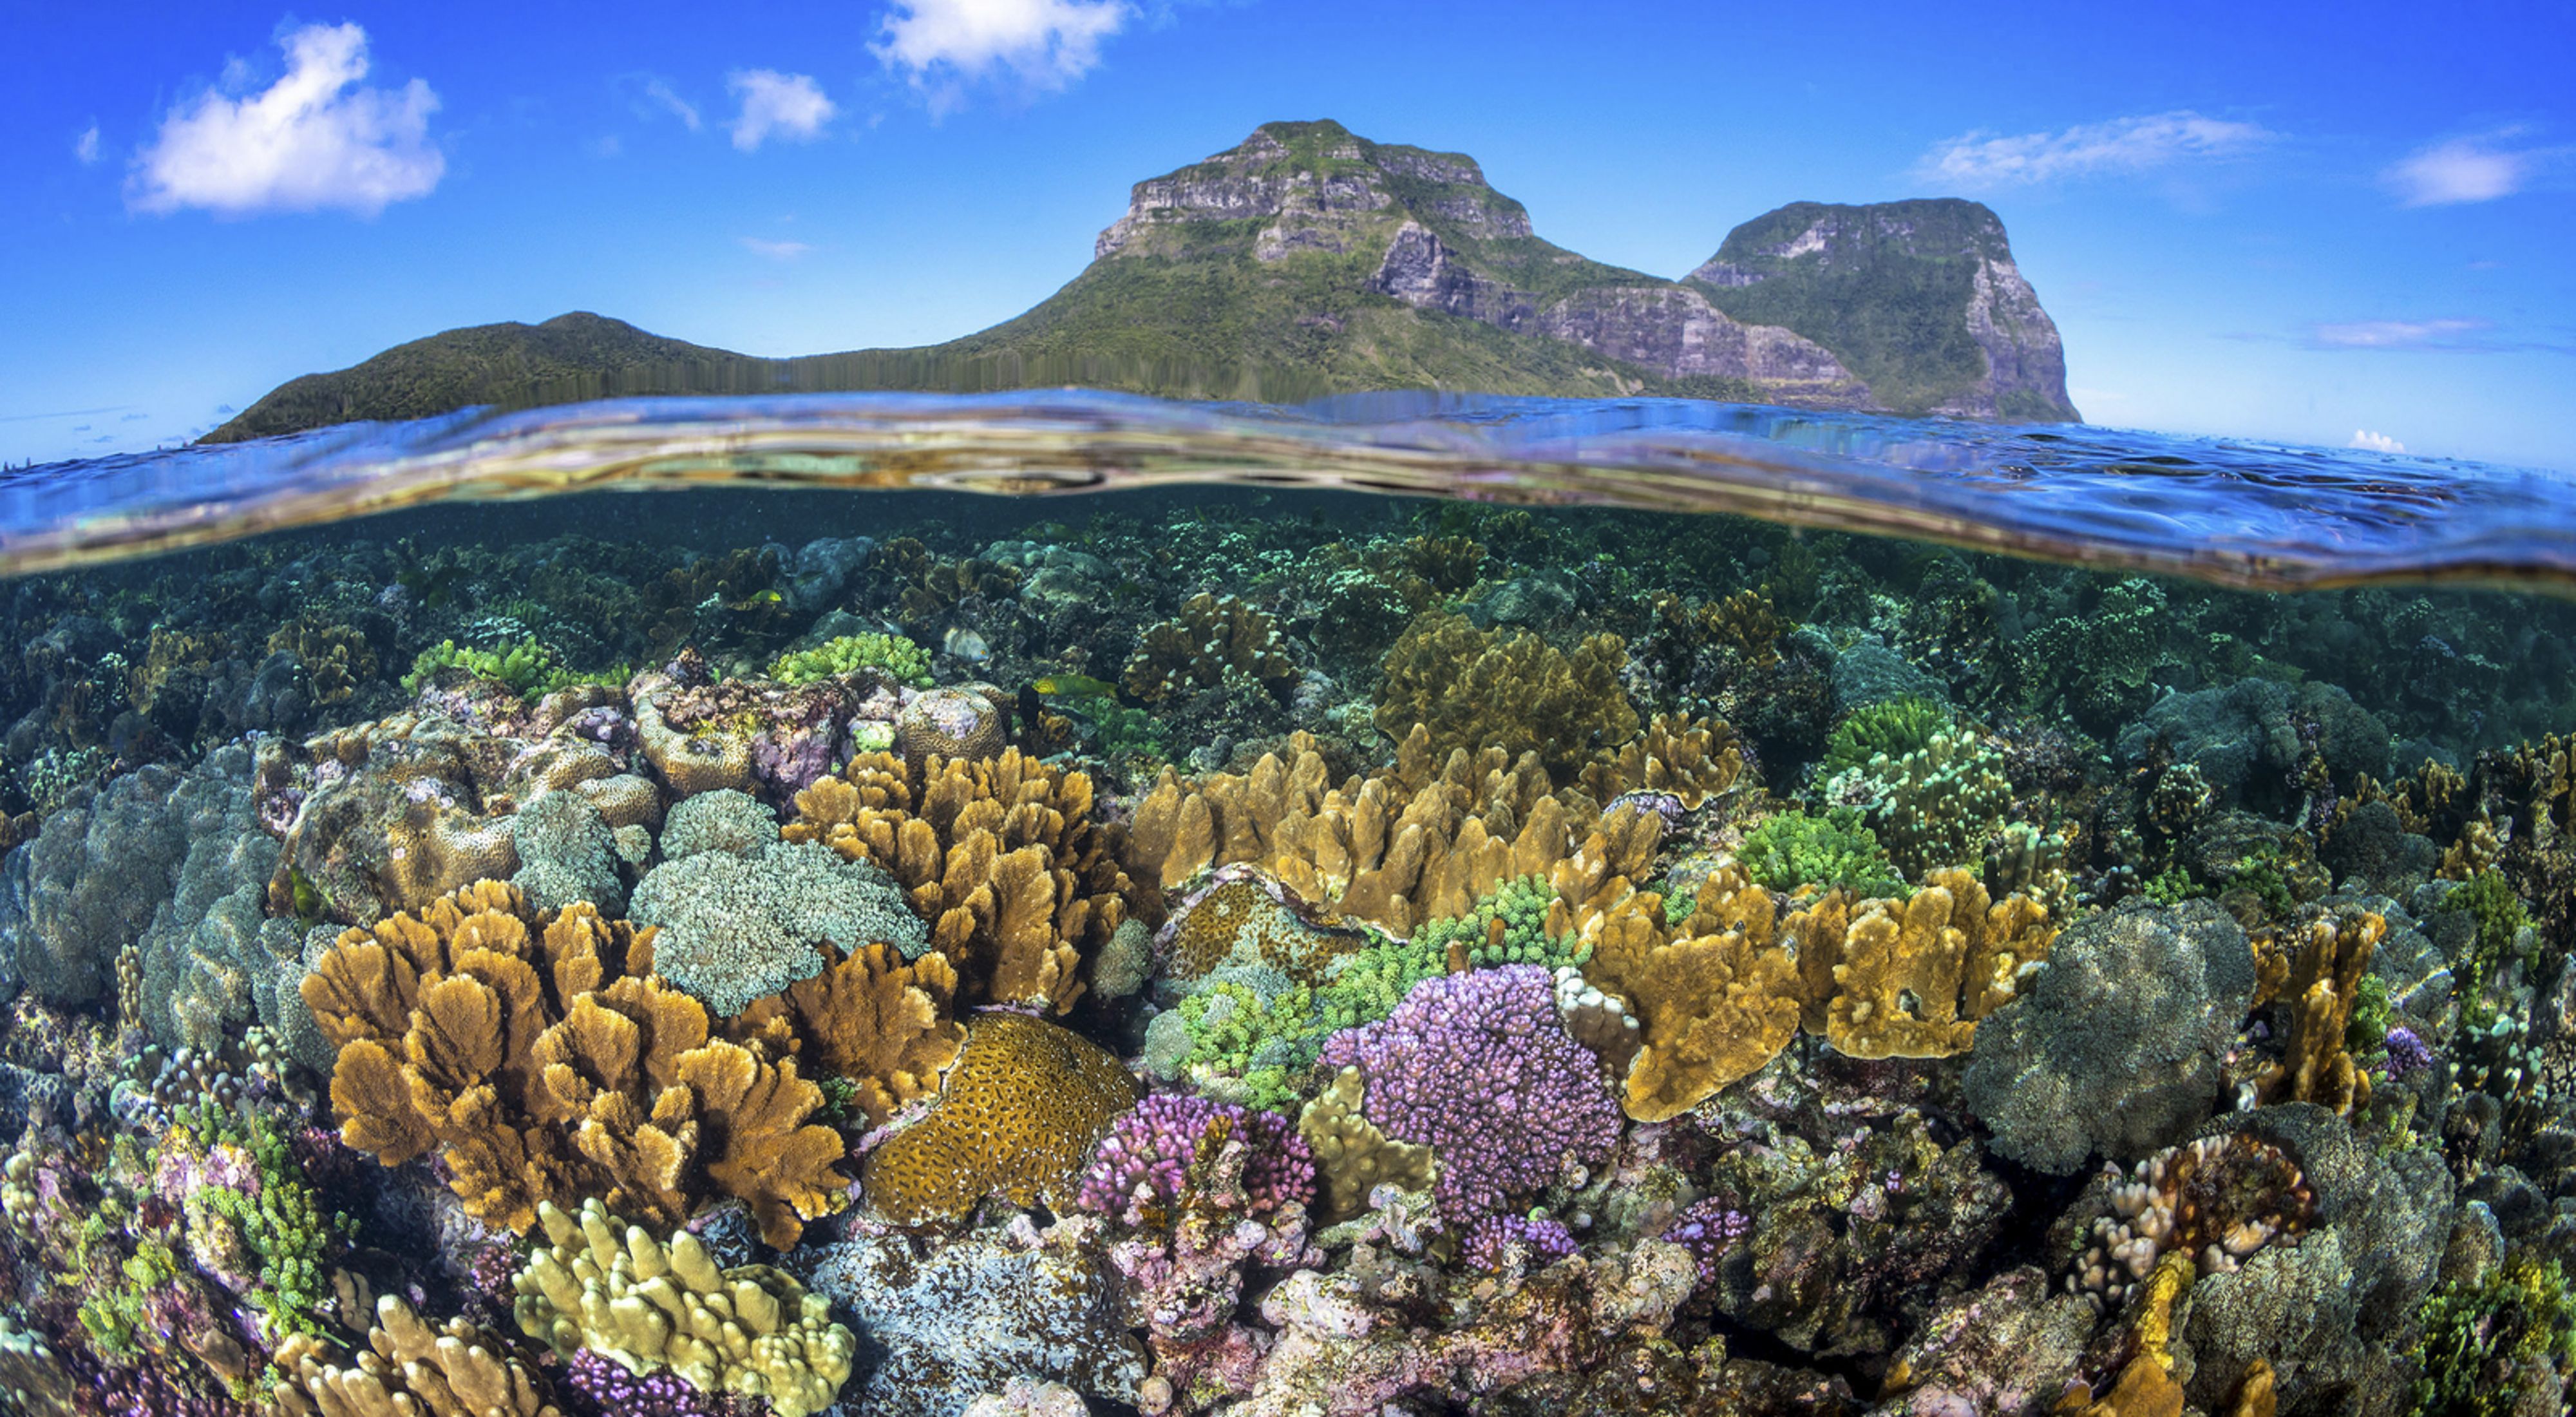 Coral reefs provide important benefits to near-shore systems.